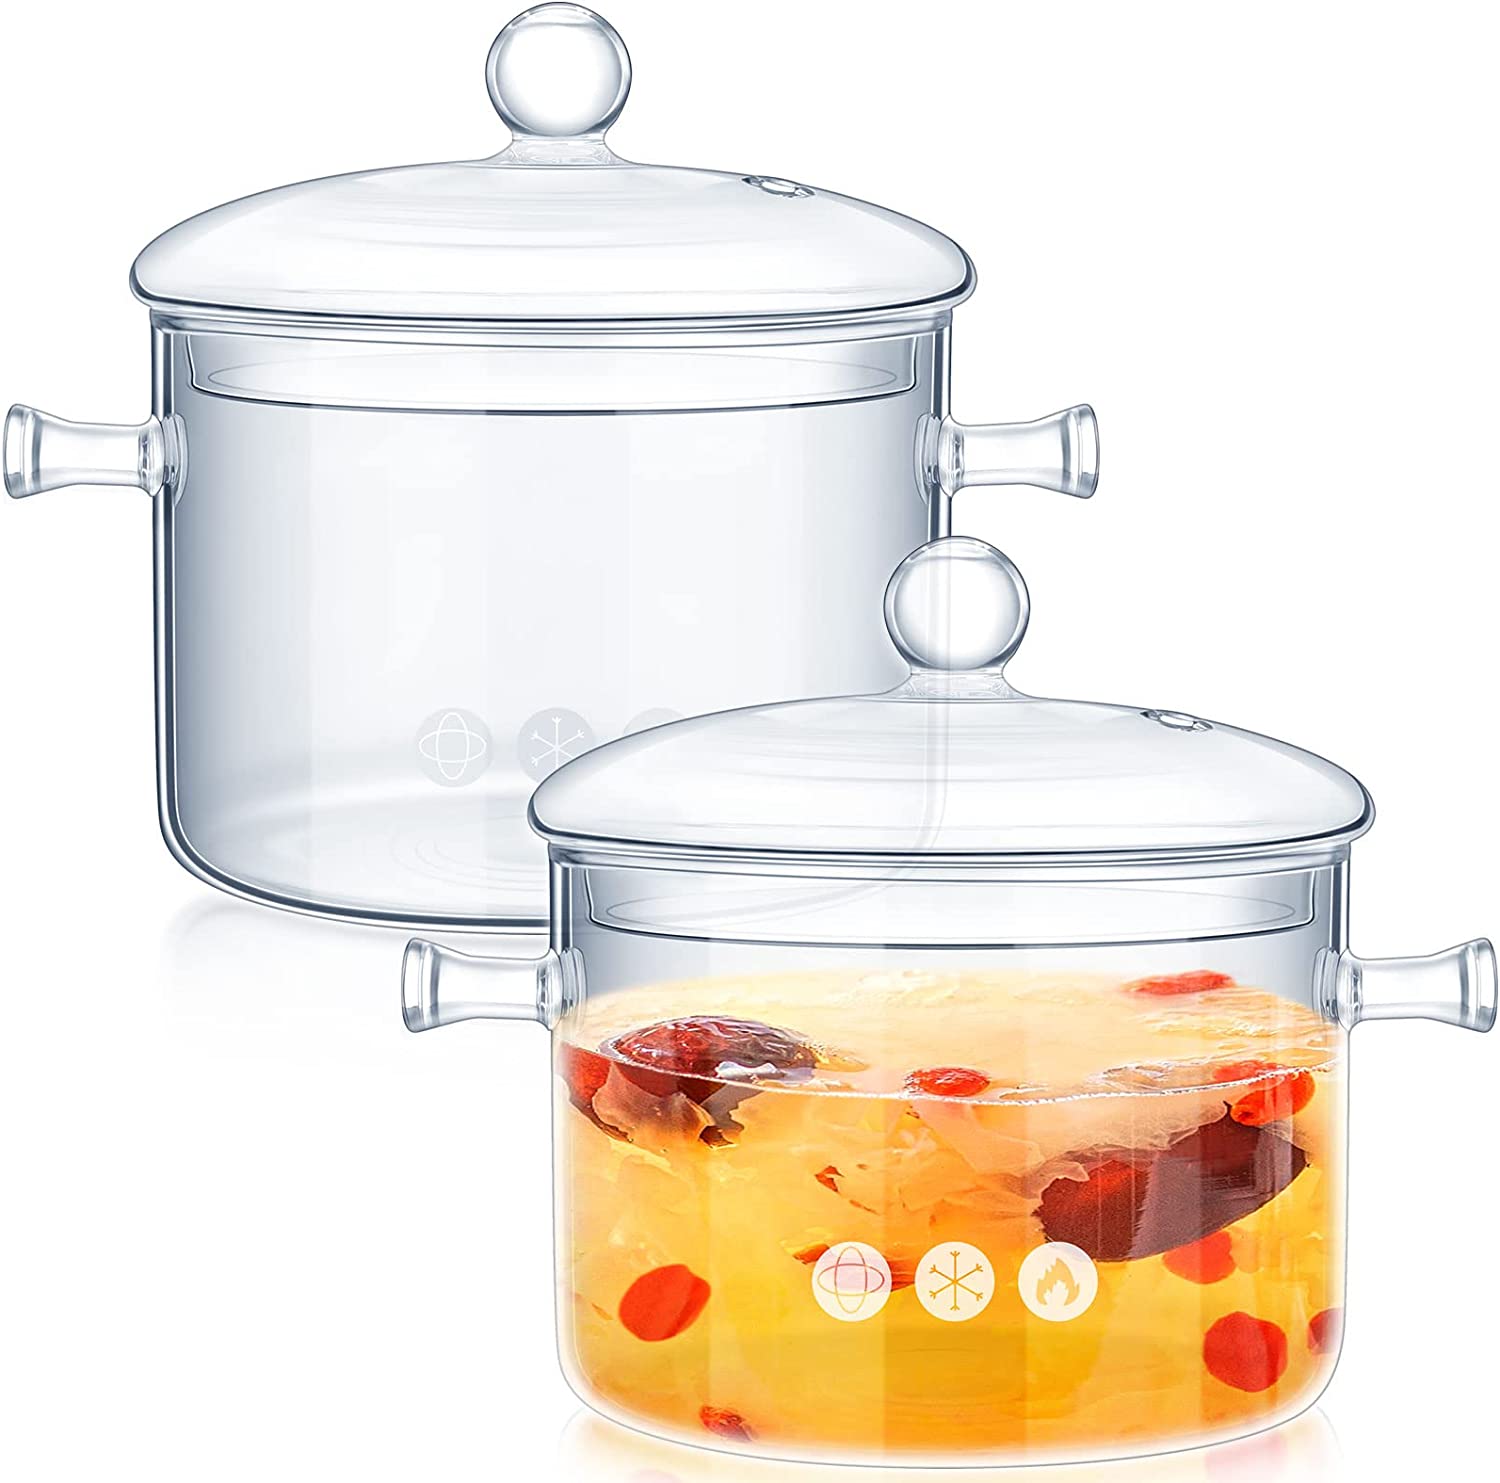 2 Pcs Glass Pots for Cooking on Stove Set Glass [...]